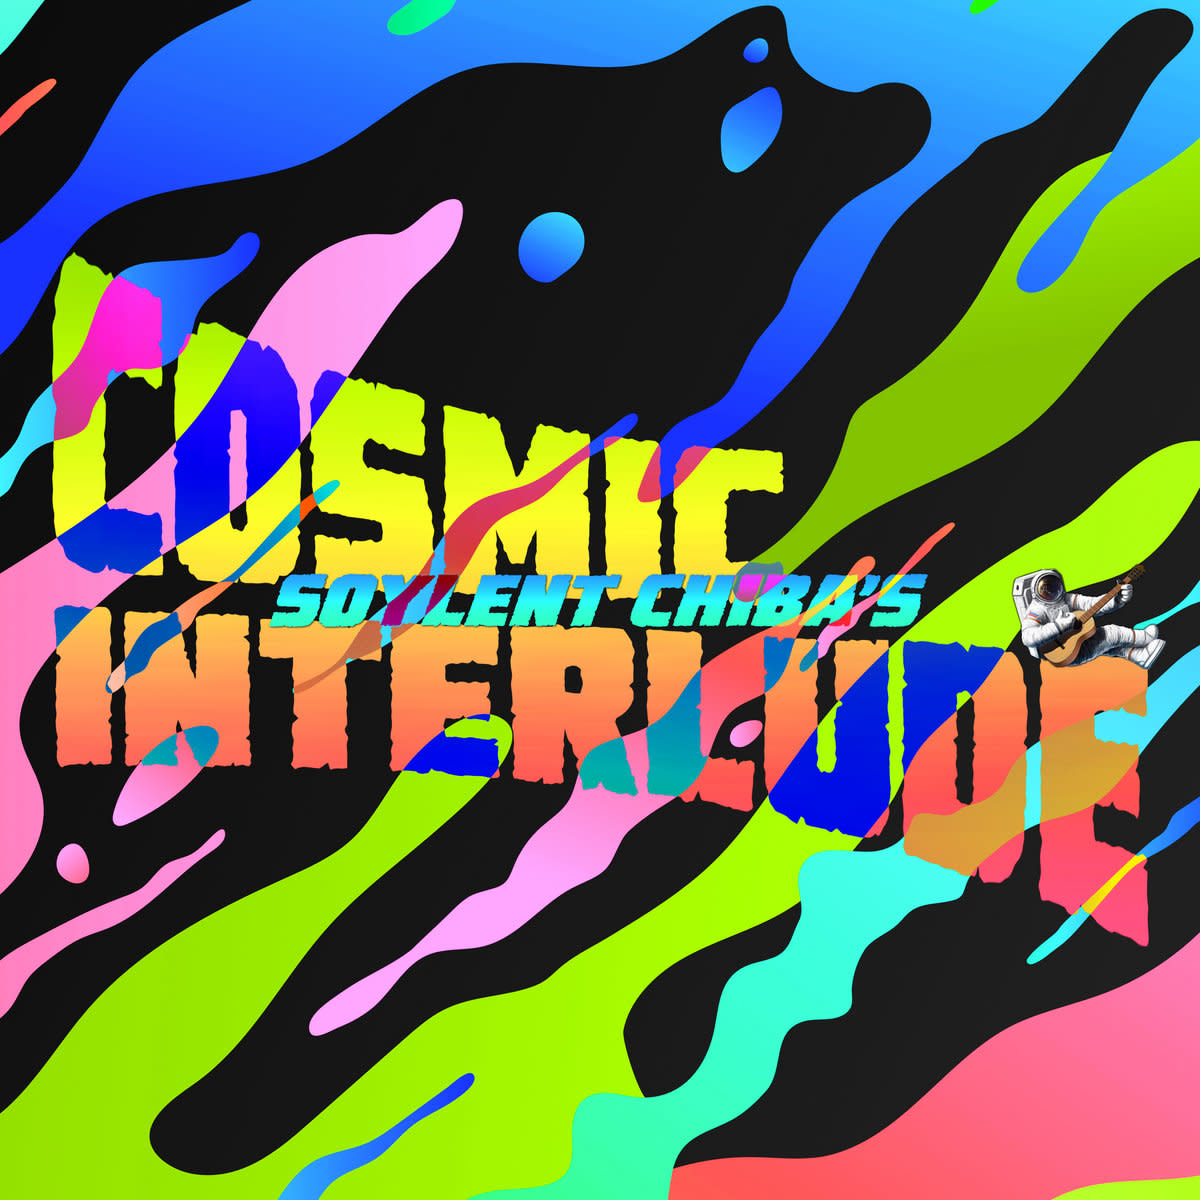 synth-ep-review-cosmic-interlude-by-soylent-chiba